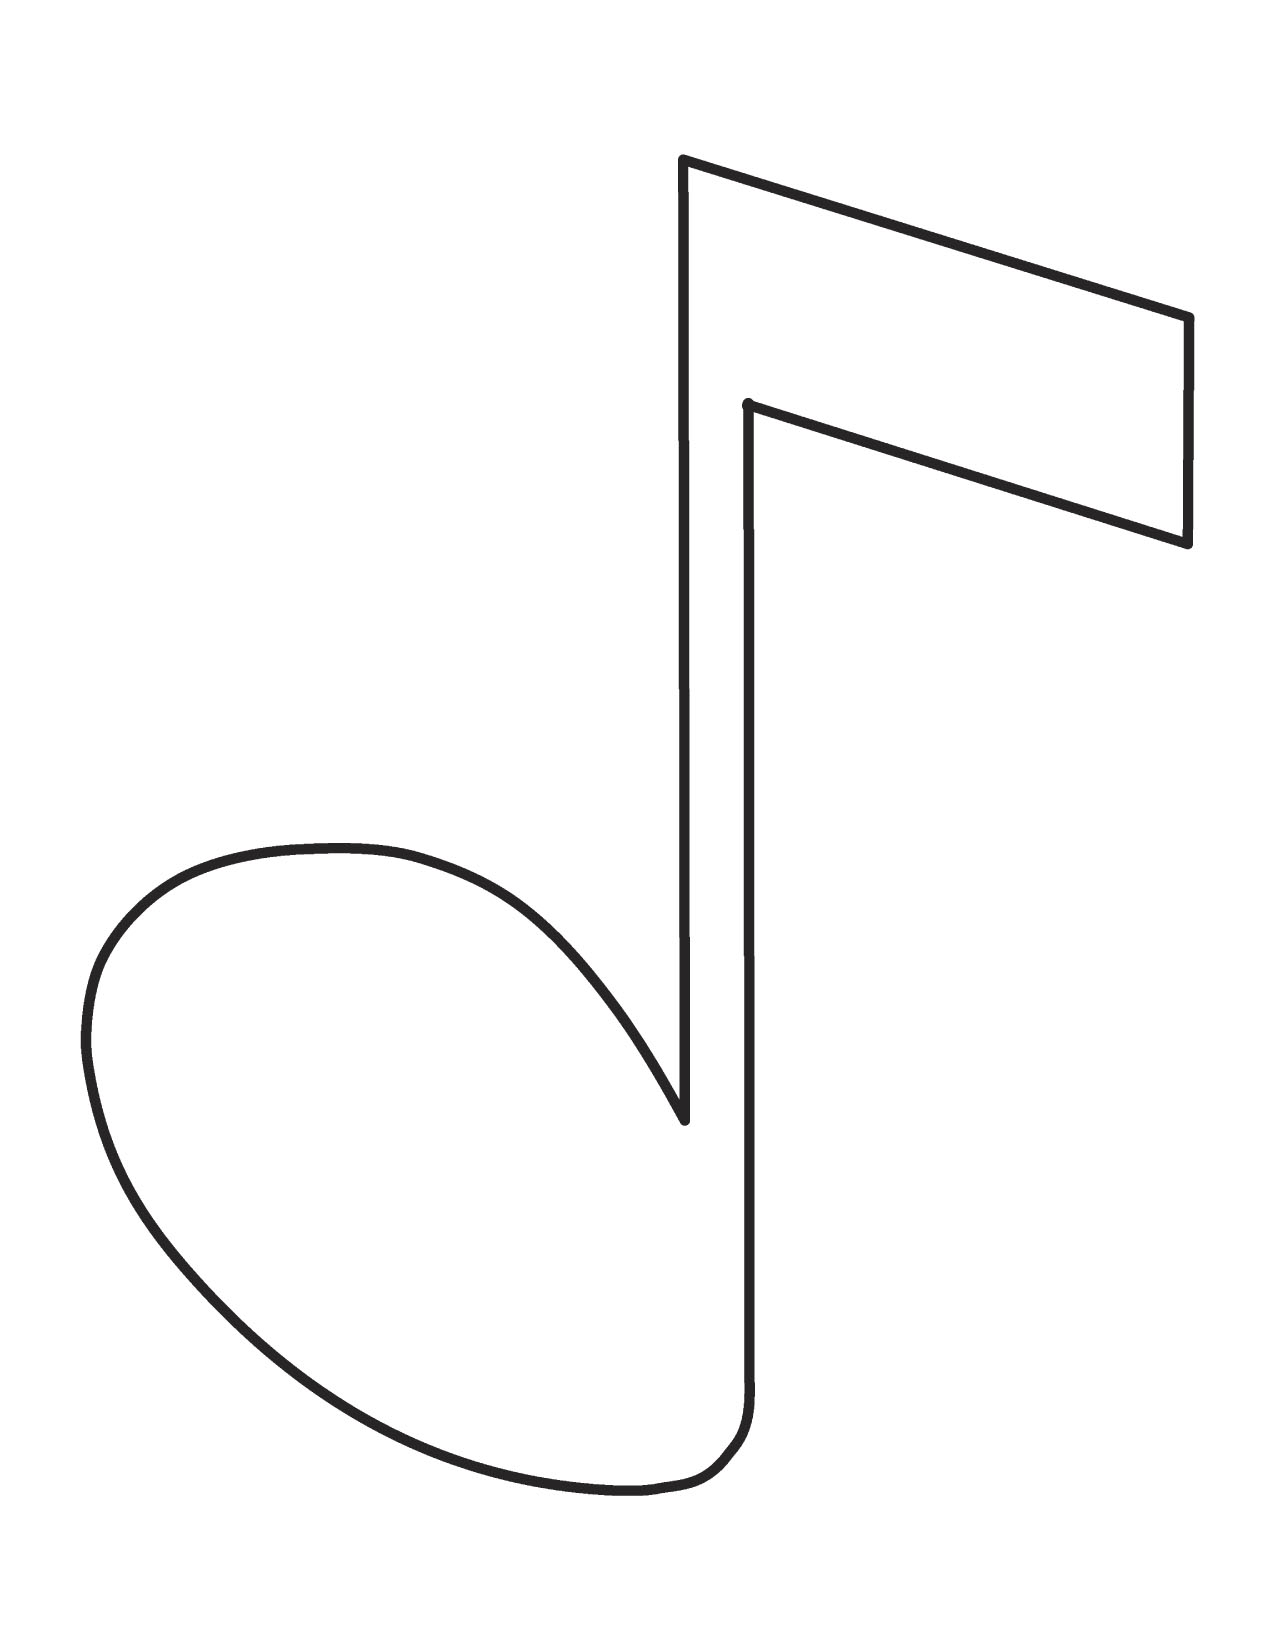 Music Note Clip Art Border Free | Clipart Panda - Free Clipart Images